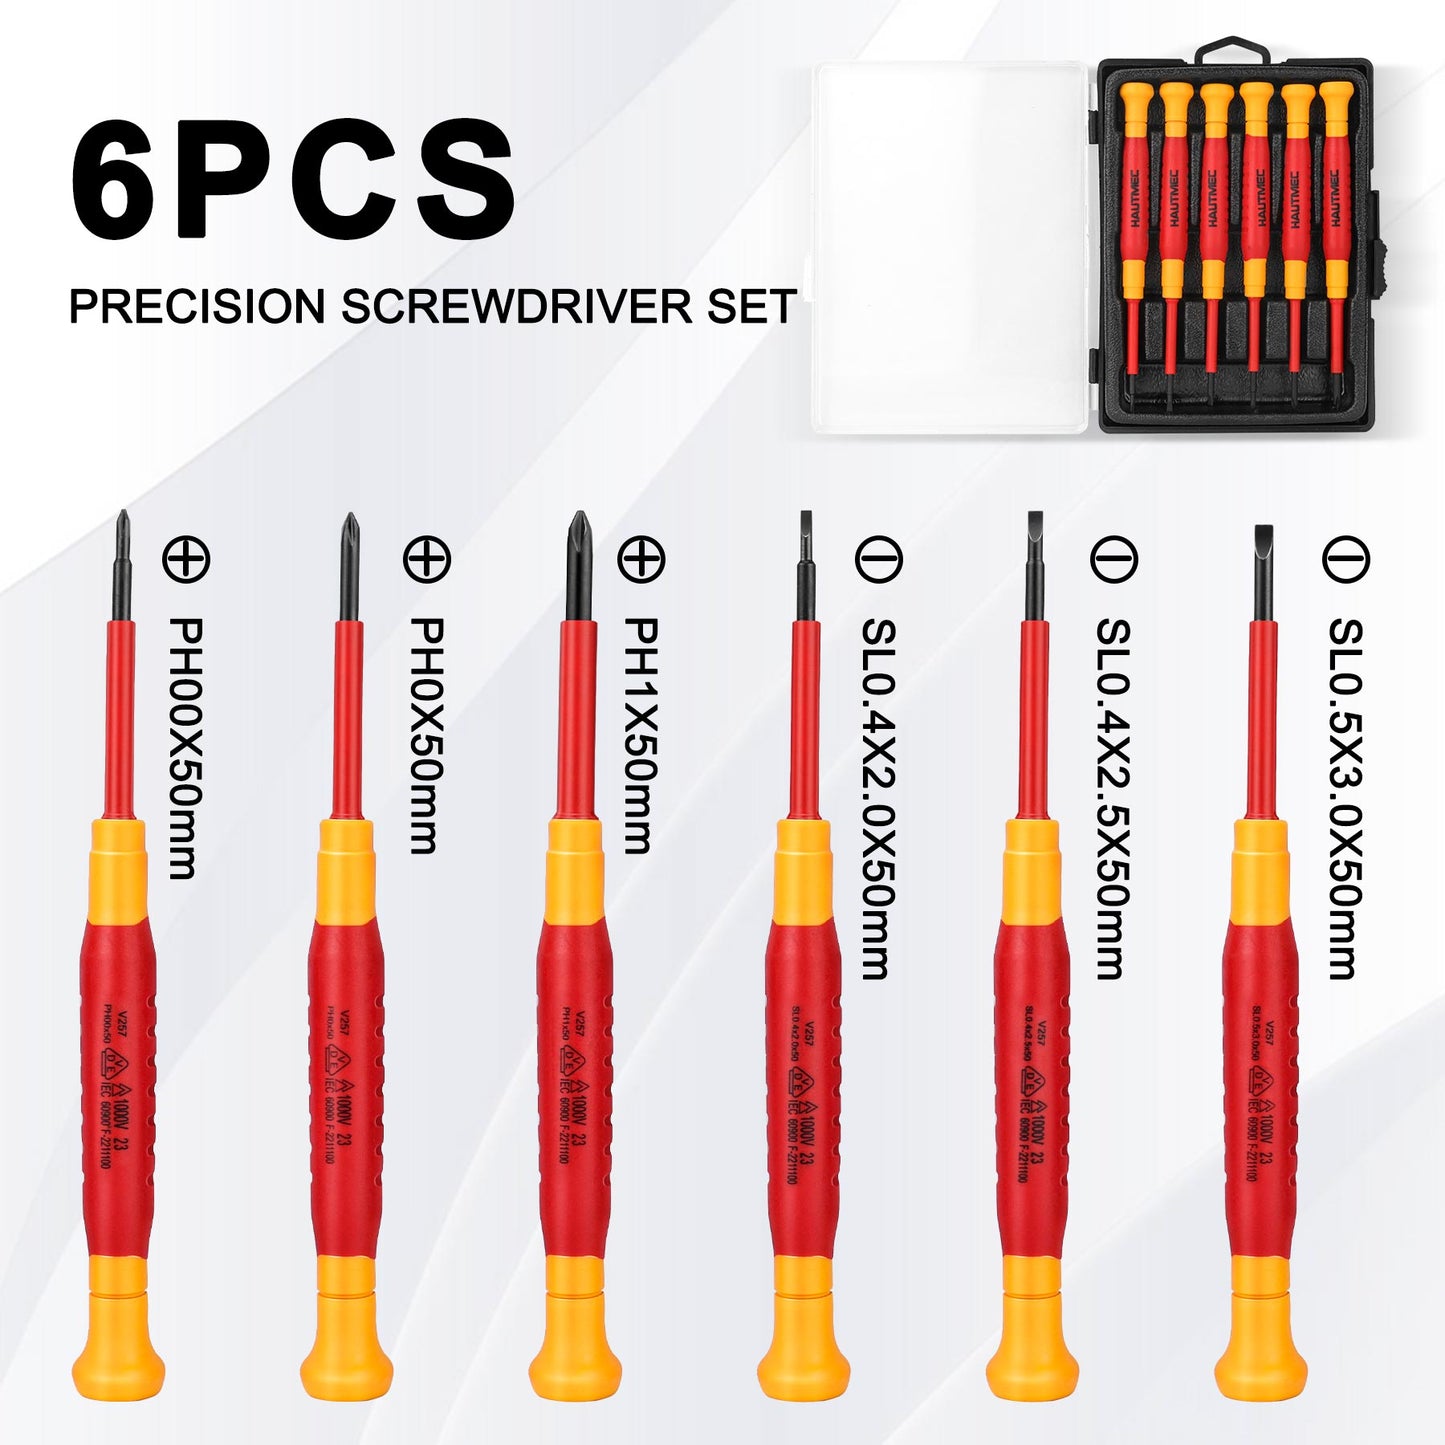 HAUTMEC 6Pcs Precision Screwdriver Set, Mini Insulated Screwdriver with Slotted and Phillips Magnetic Tip HT0313